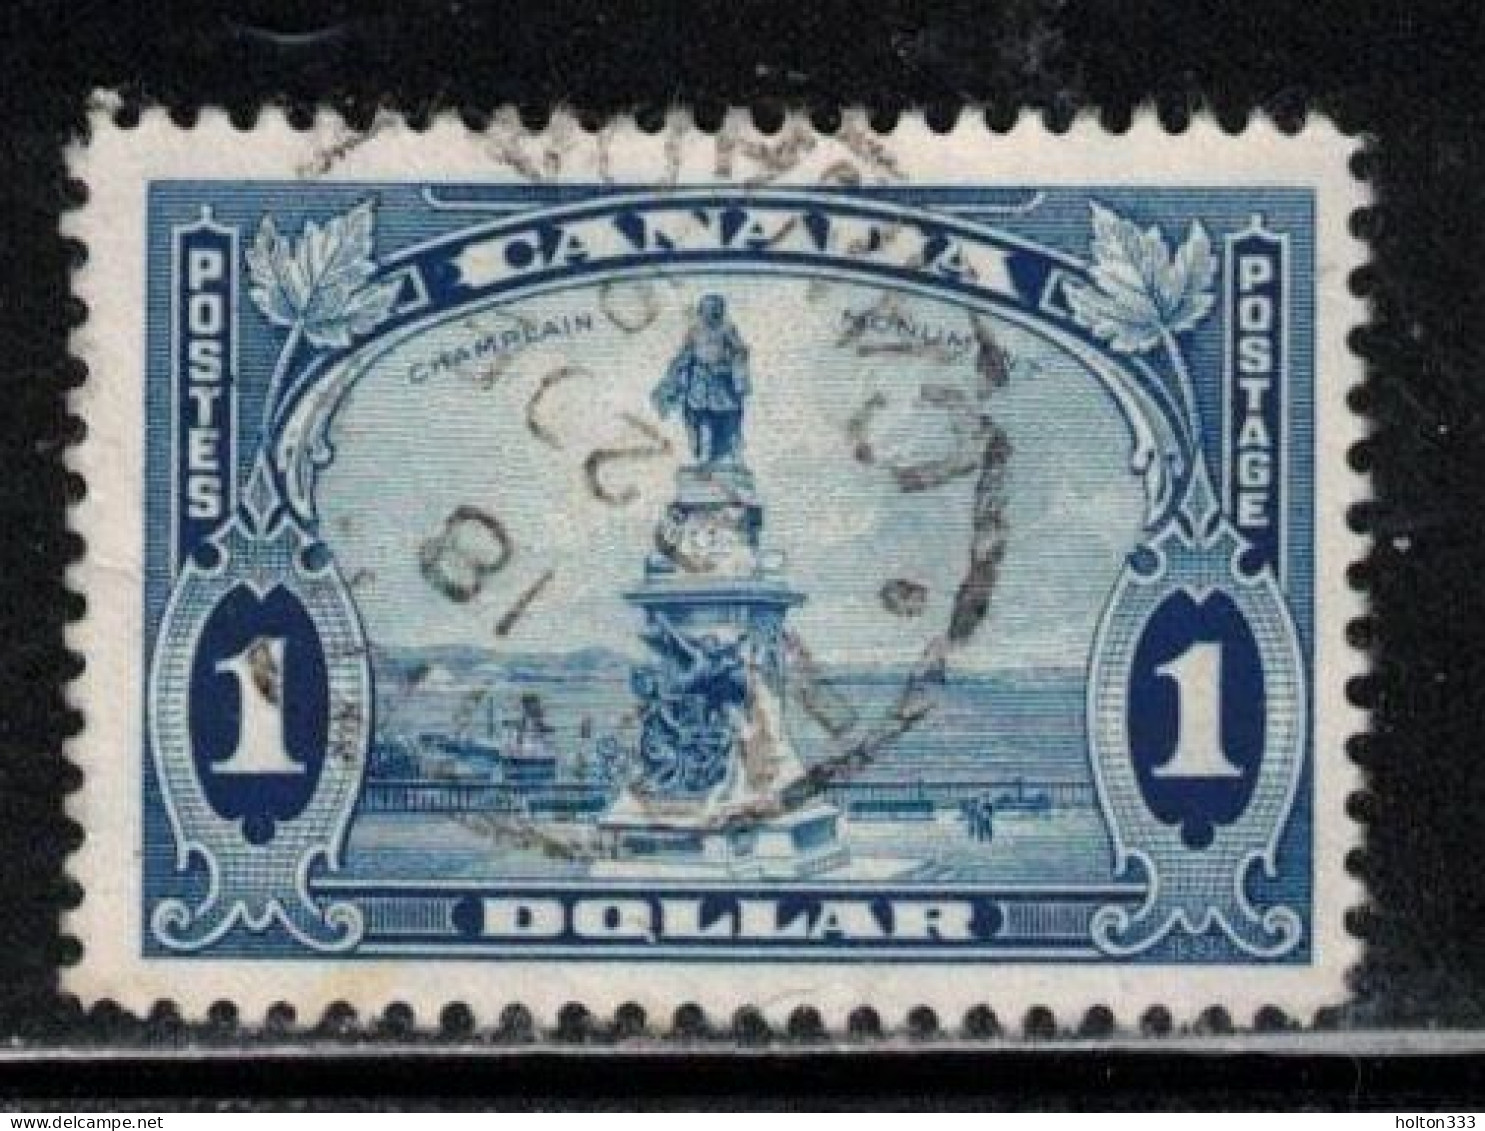 CANADA Scott # 227 Used - Statue Of Samuel De Champlain - Used Stamps